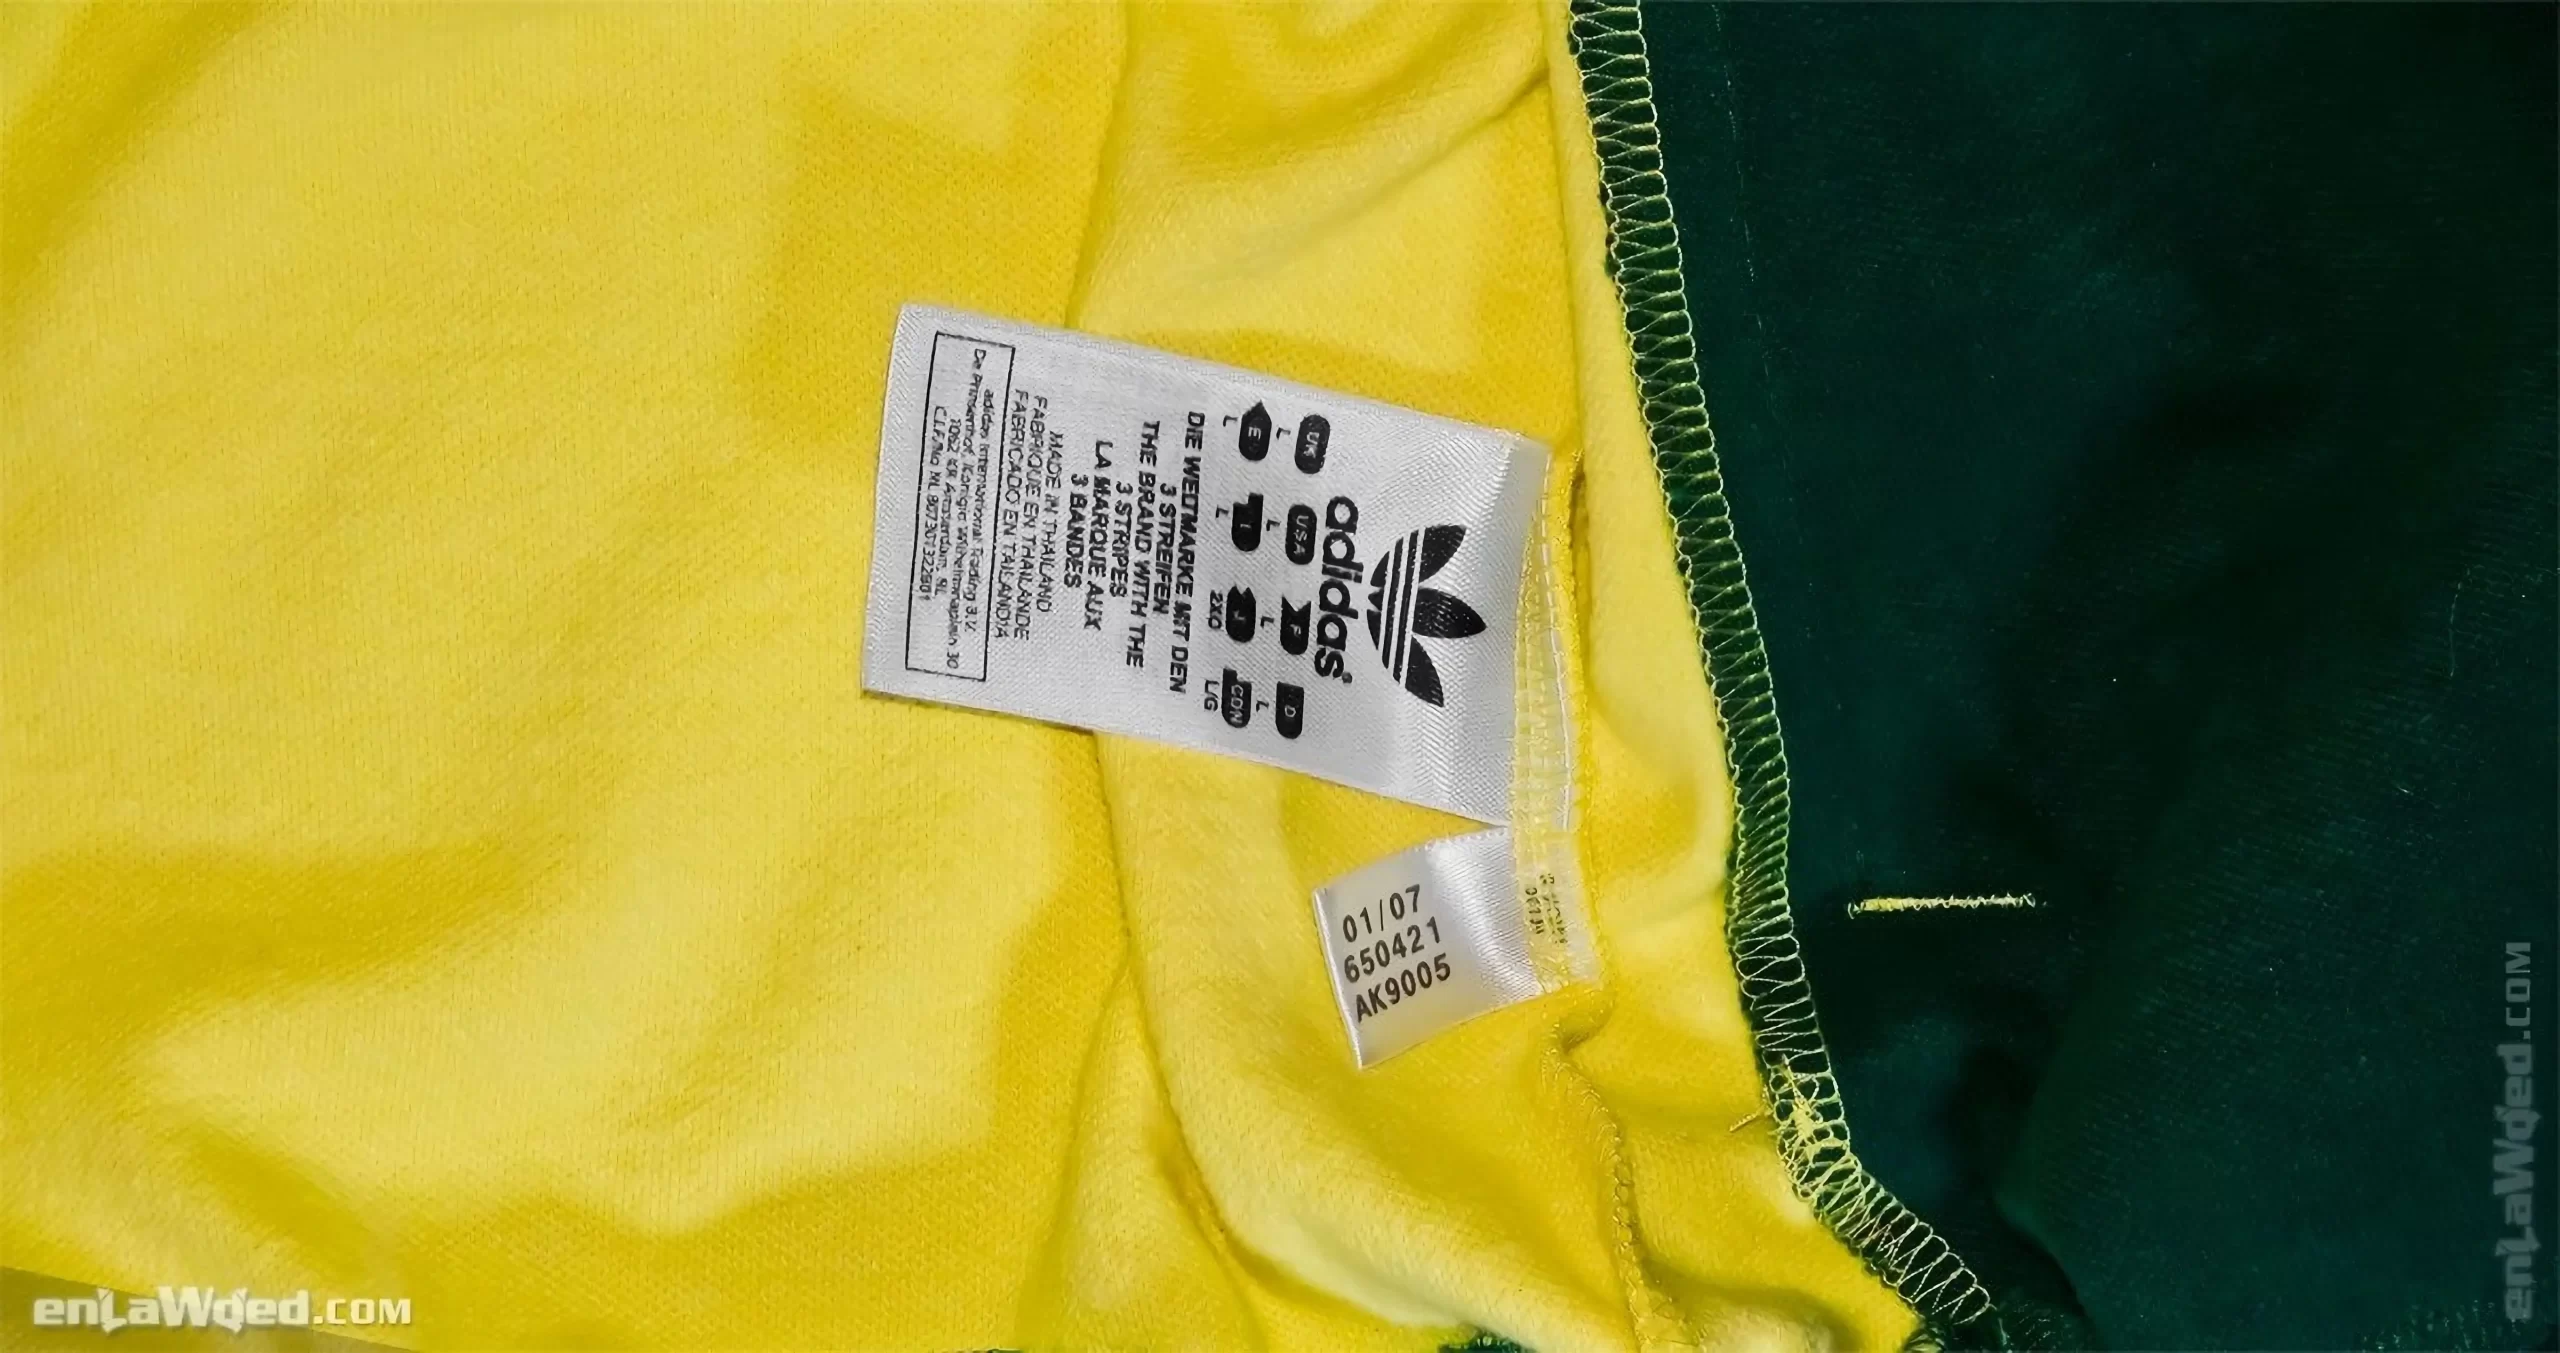 Adidas tag of the Marrakech jacket, with the month and year of fabrication: 01/2007